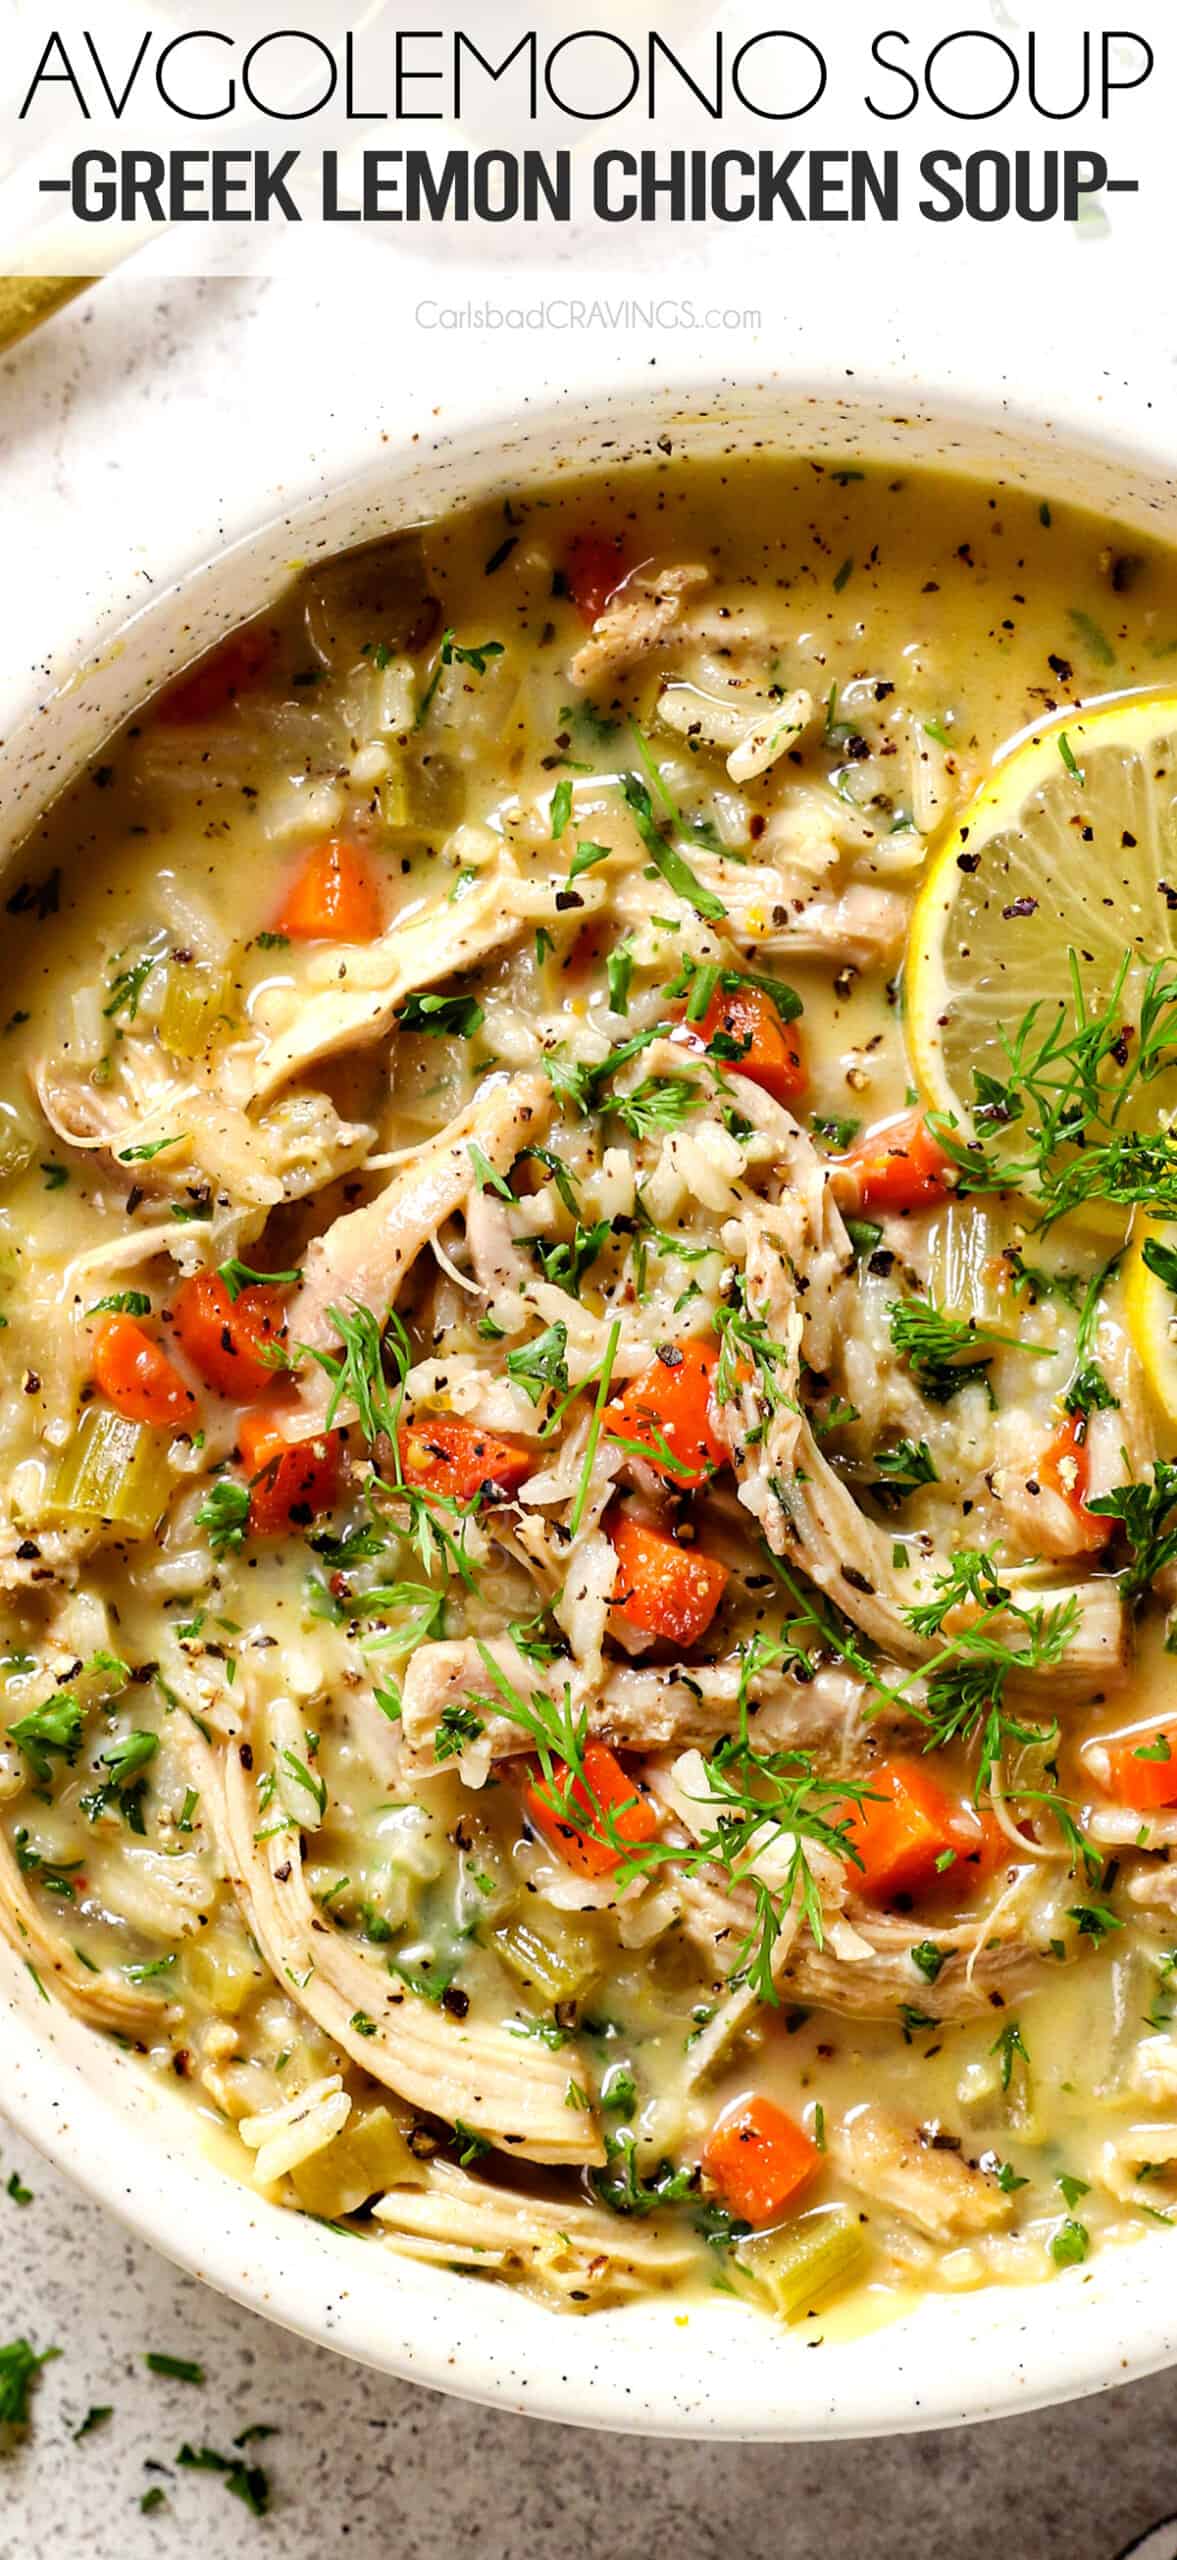 a bowl of Avgolemono Soup (Greek Lemon Chicken Soup) with chicken, lemon and rice in a bowl garnished by dill